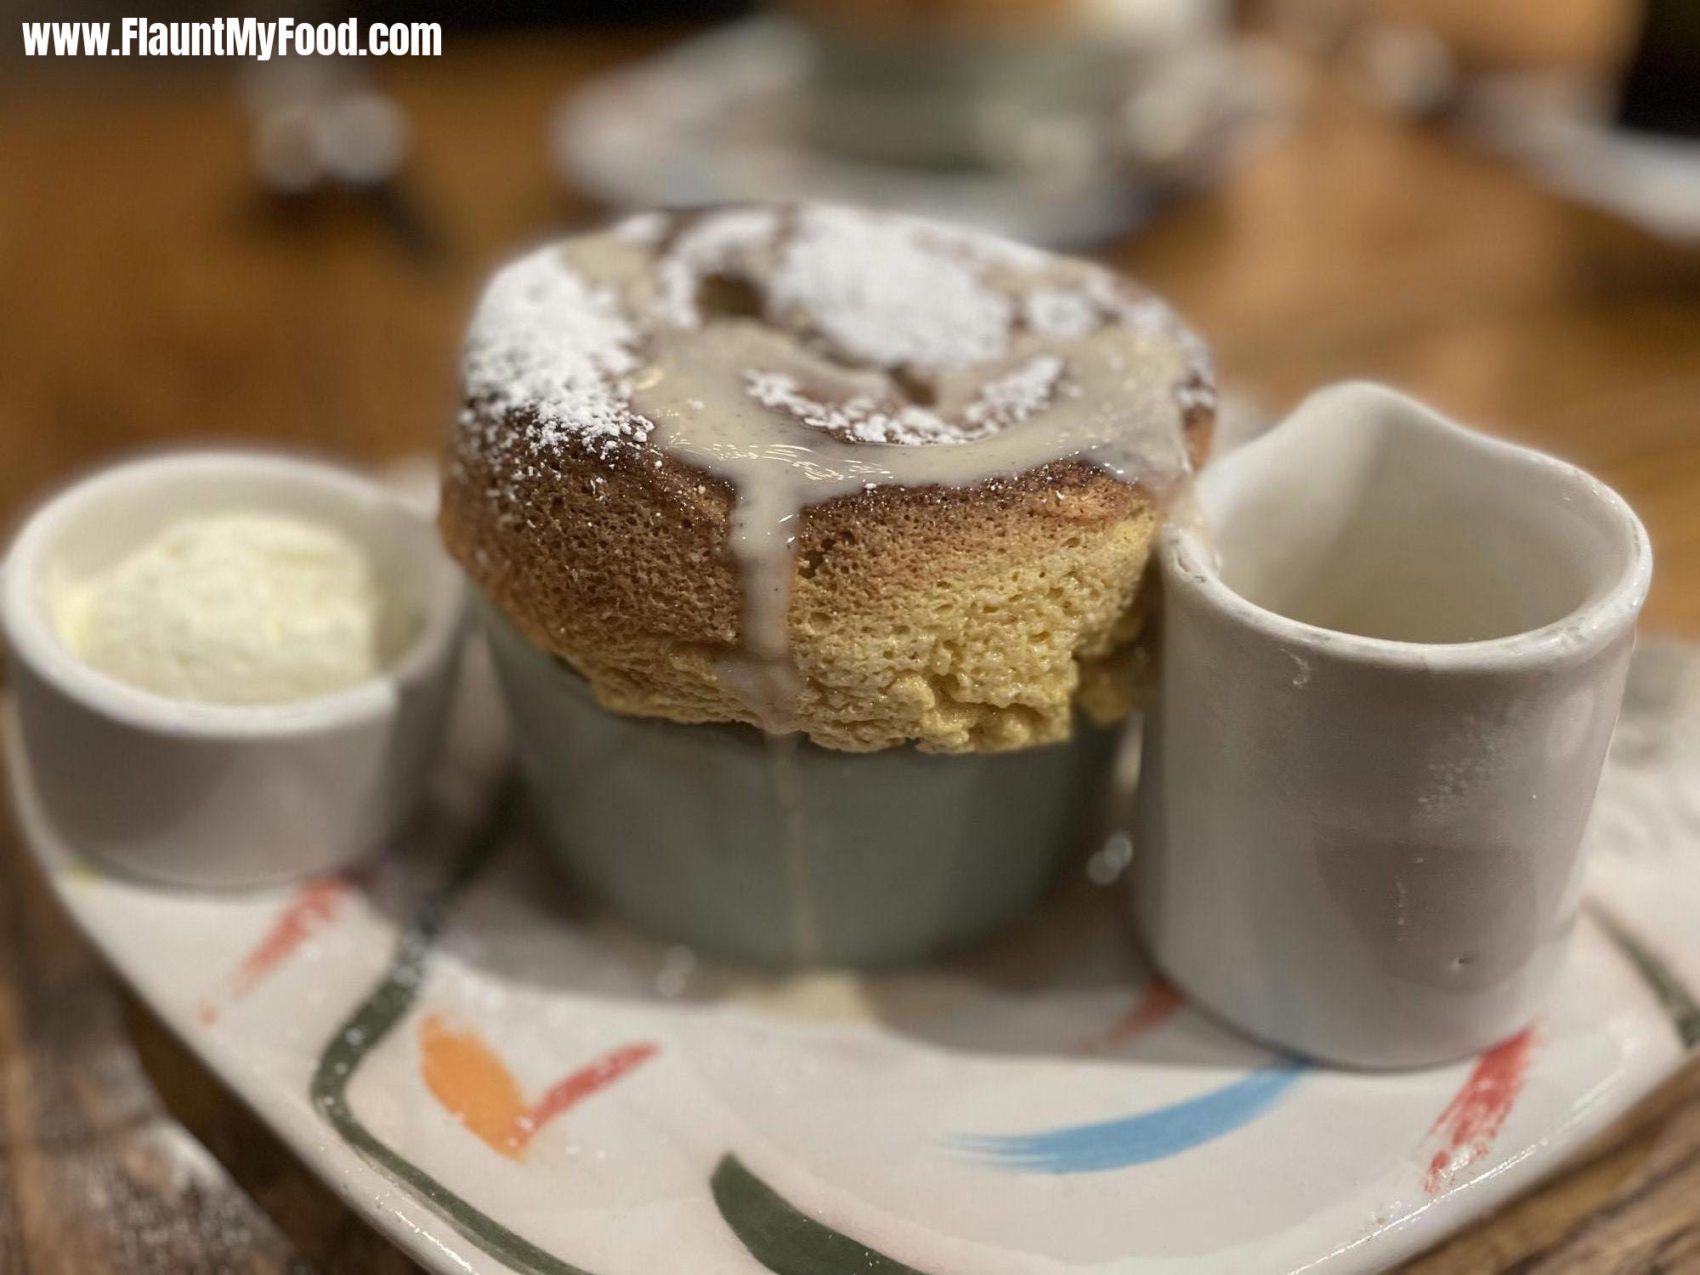 Pumpkin Soufflé at Rise Soufle Restaurant located in Clearfork in Fort Worth Texas